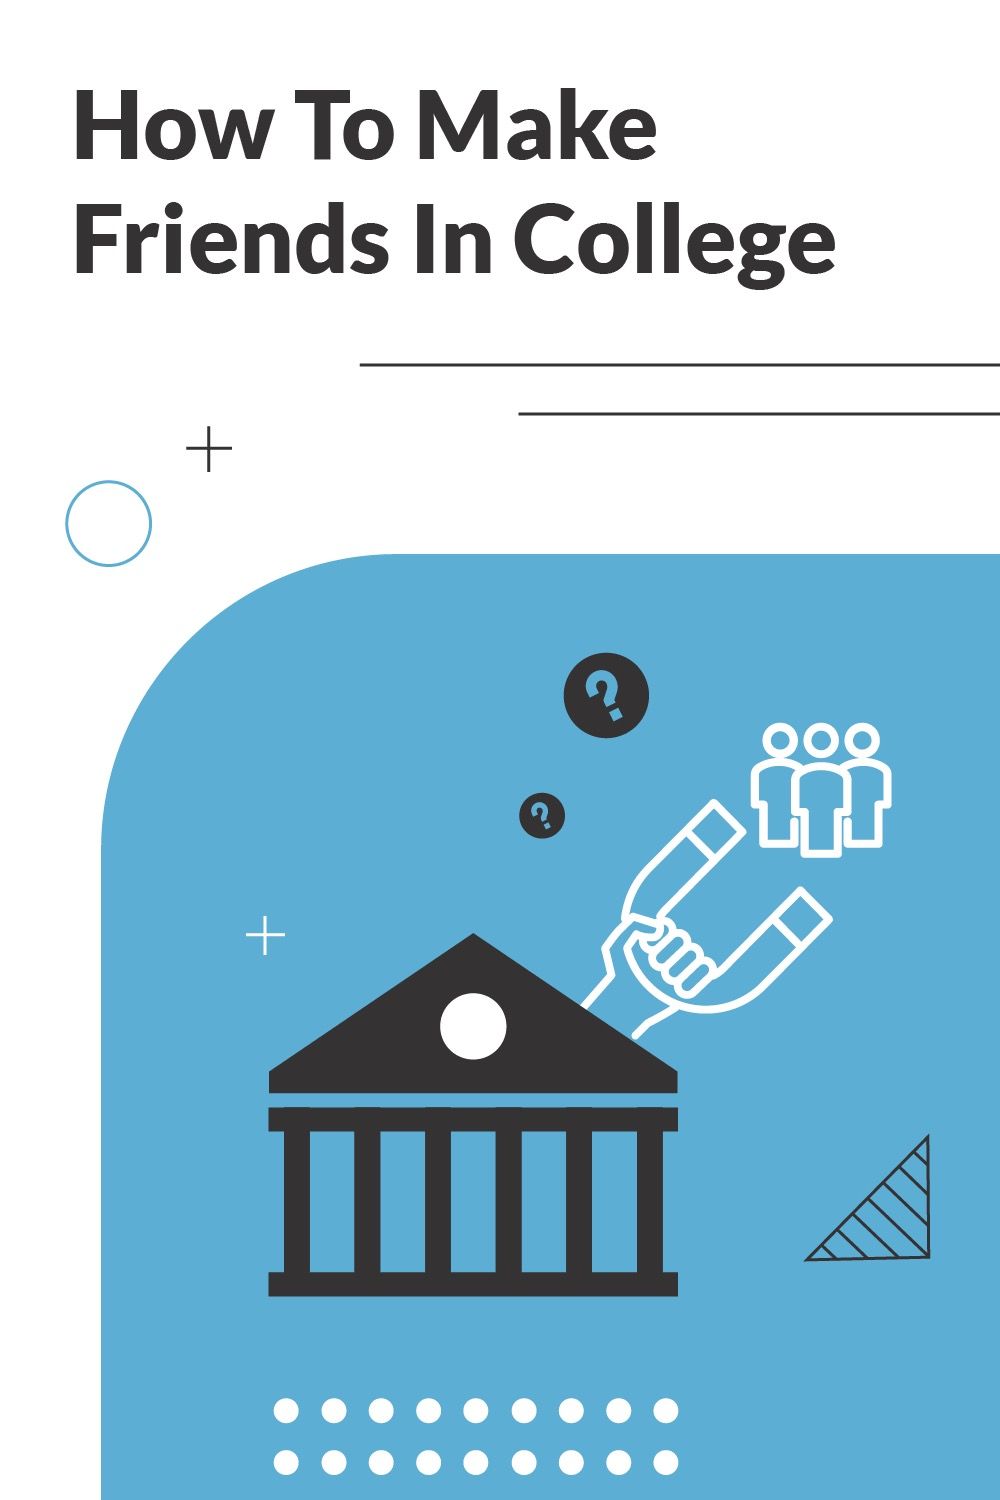 How To Make Friends In College Pinterest Image